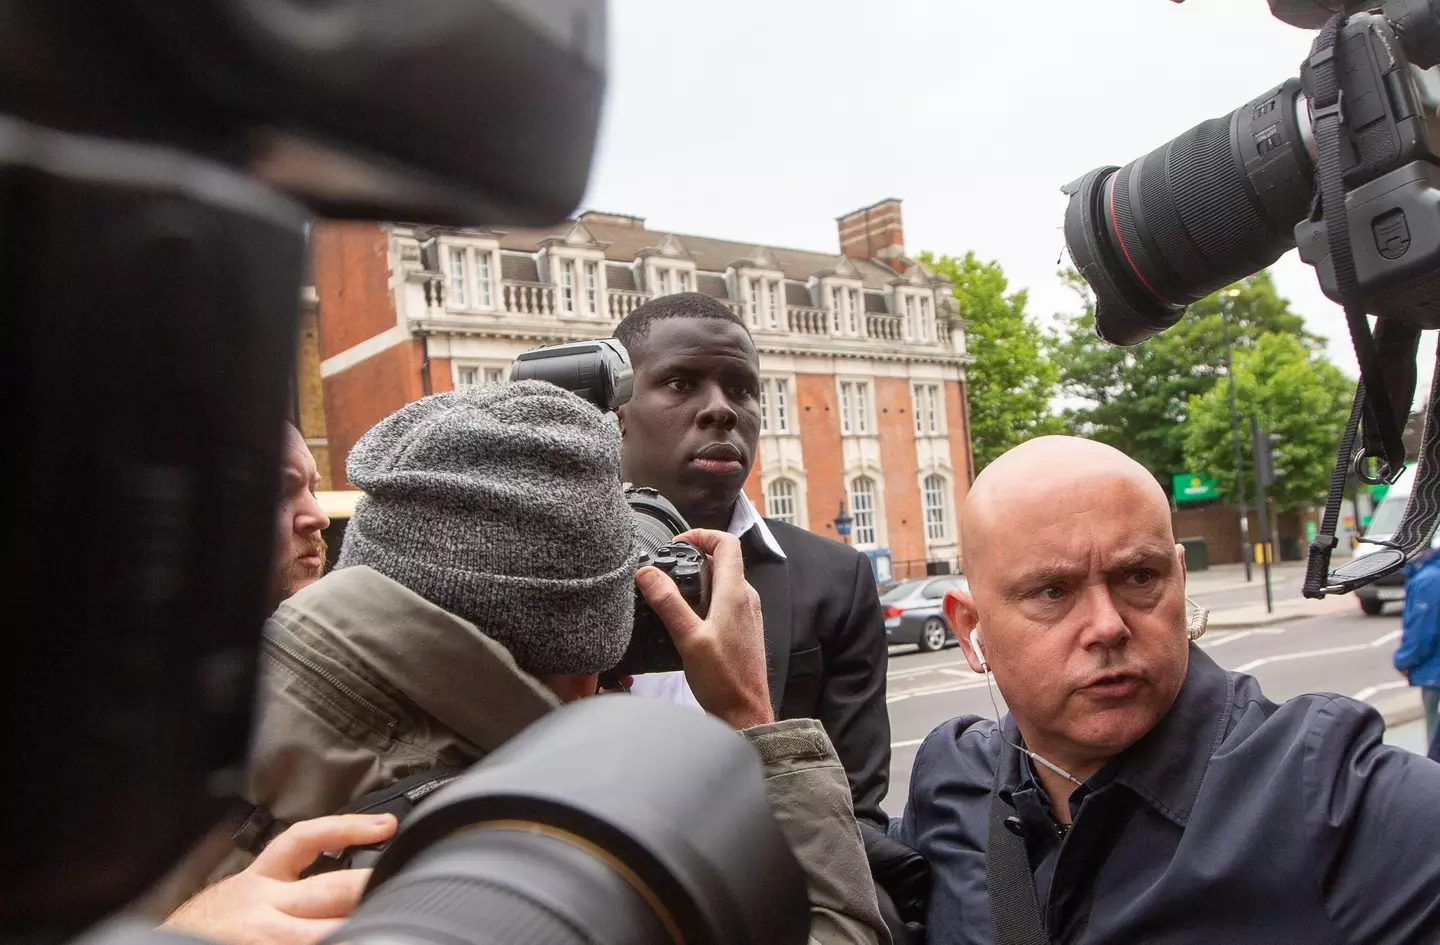 Zouma's community service could include tackling graffiti and litter-picking.